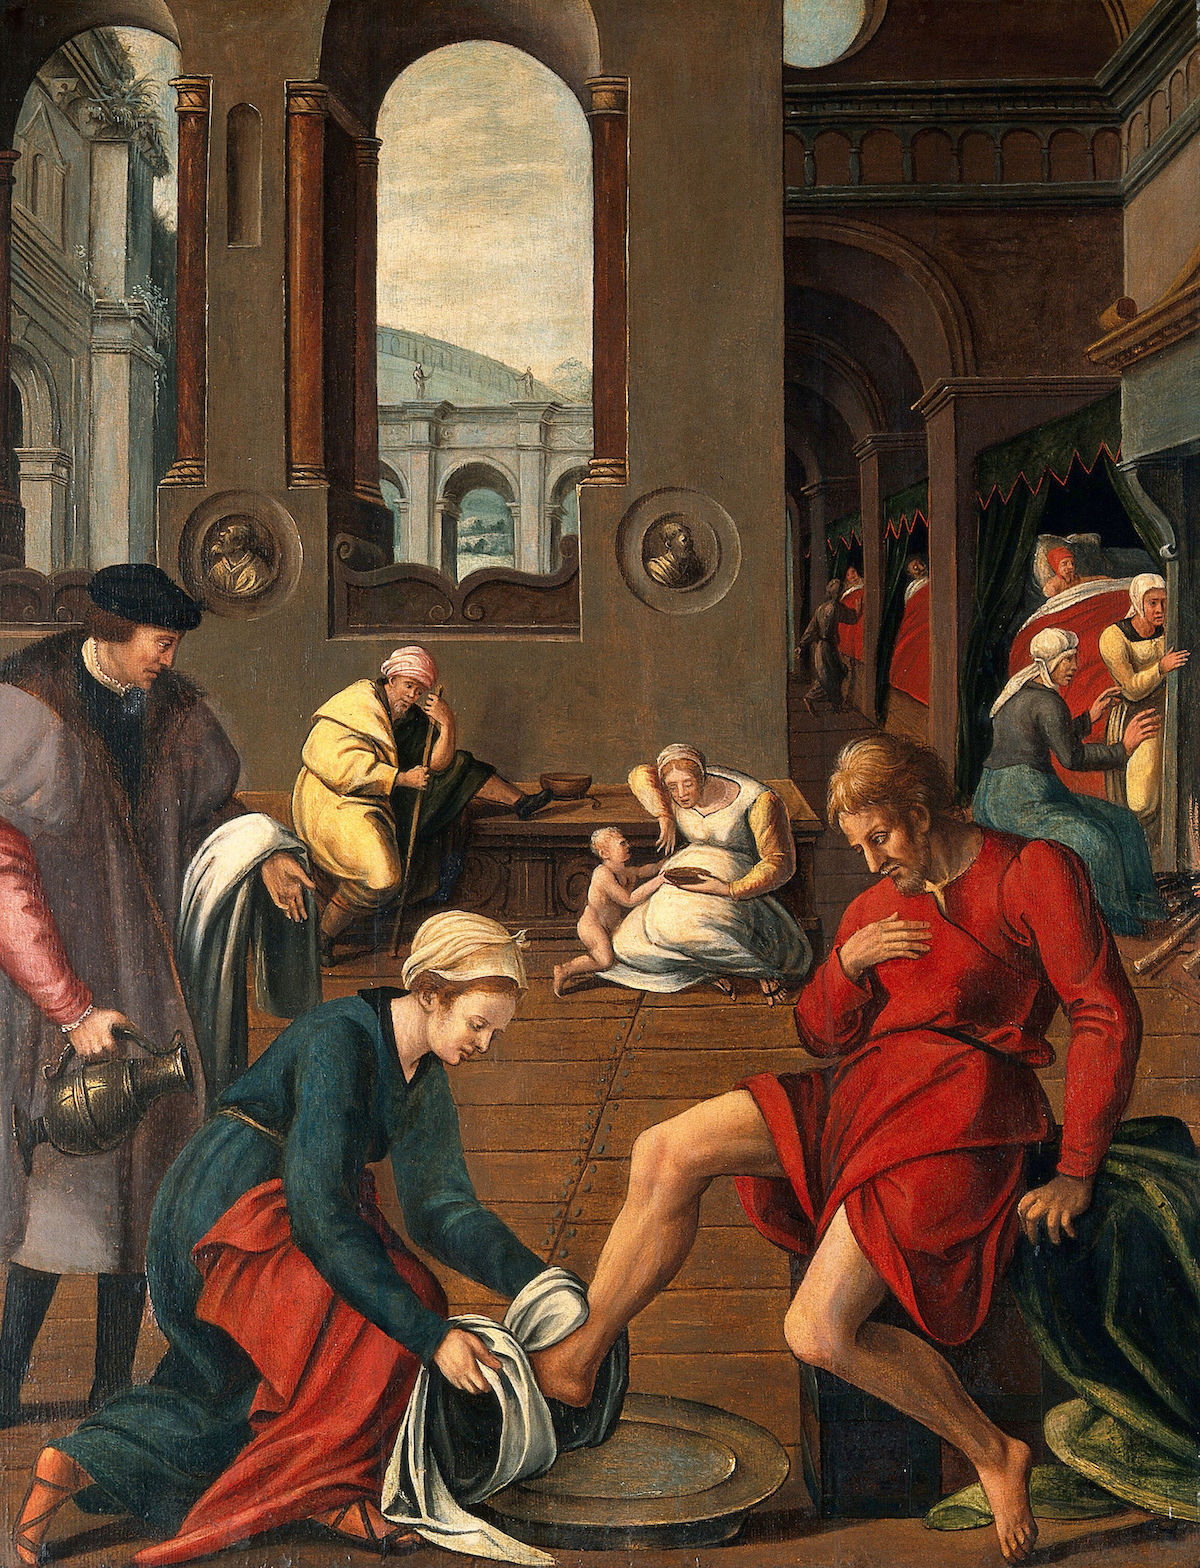 Interior of a hospital with a woman washing a man's feet, unknown artist, c. 16th century. Wellcome Collection. Public Domain.